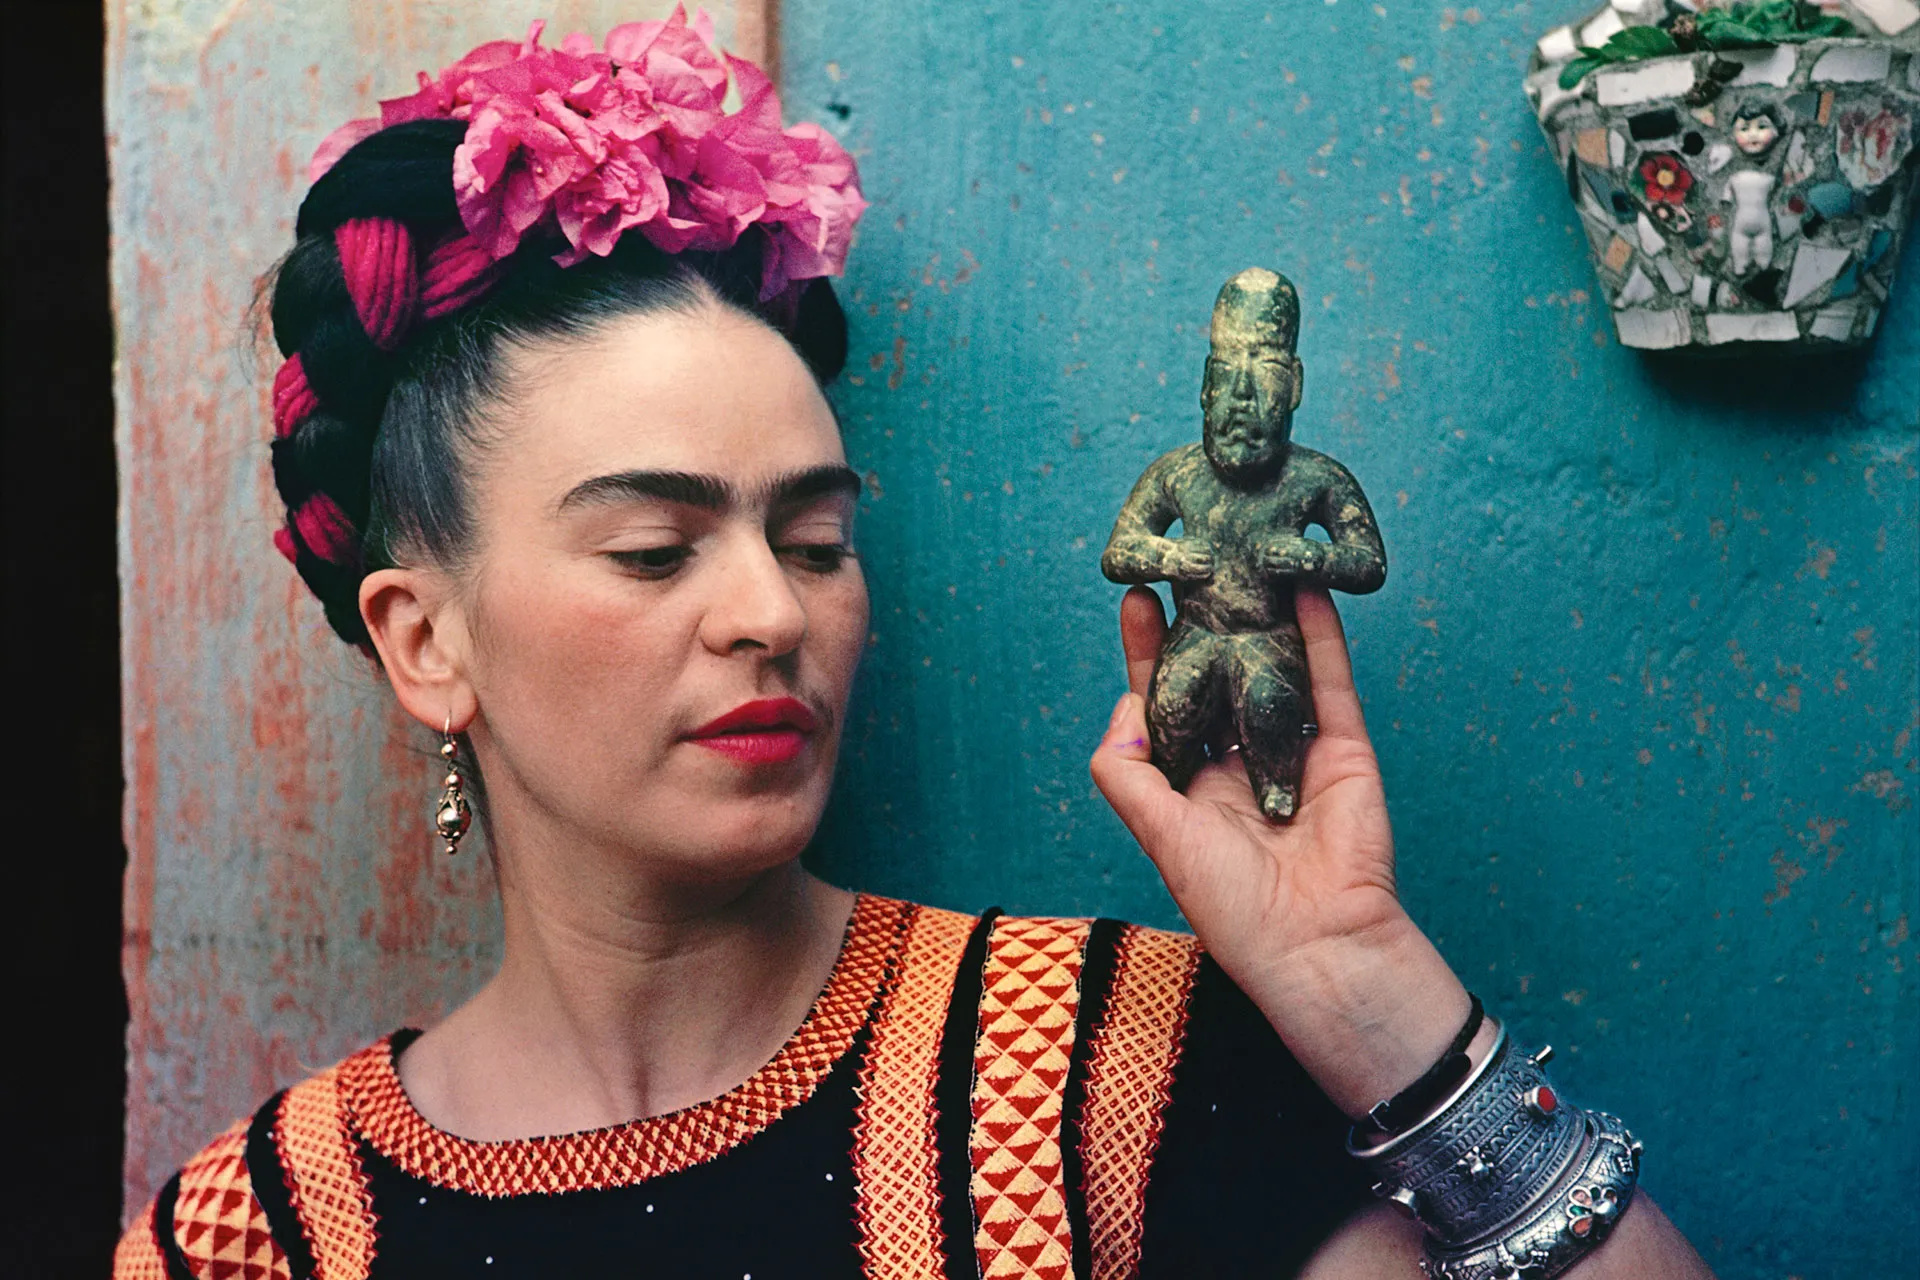 Unconventional beauty routine, Frida Kahlo's self-care, Vogue Germany, Iconic style, 1920x1280 HD Desktop